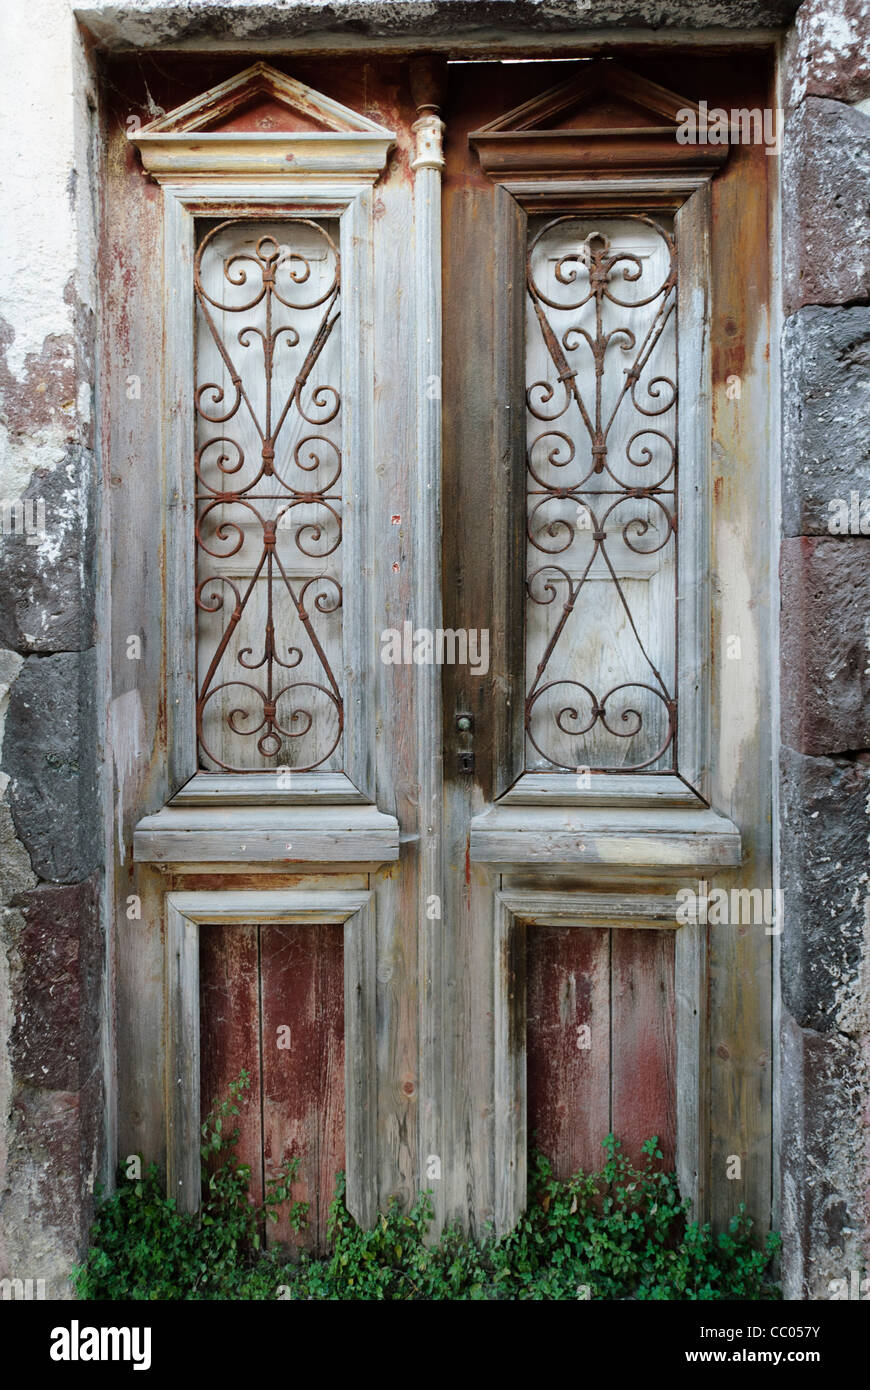 A pair of dilapidated old wooden panelled doors in Oia, Santorini, Greece Stock Photo